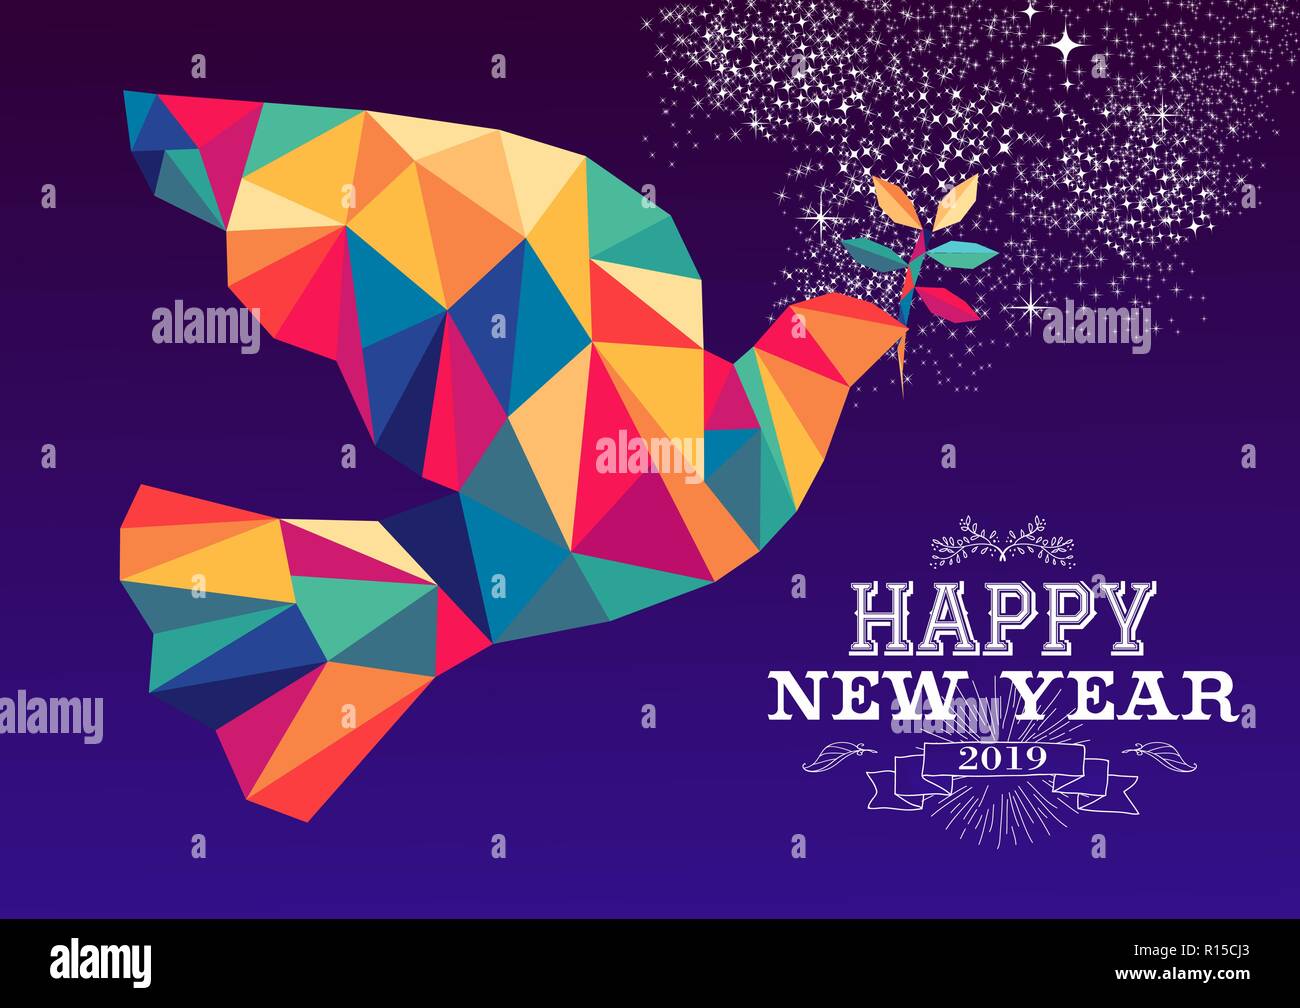 Happy new year 2019 greeting card or poster design with colorful triangle peace dove and vintage label illustration. EPS10 vector. Stock Vector